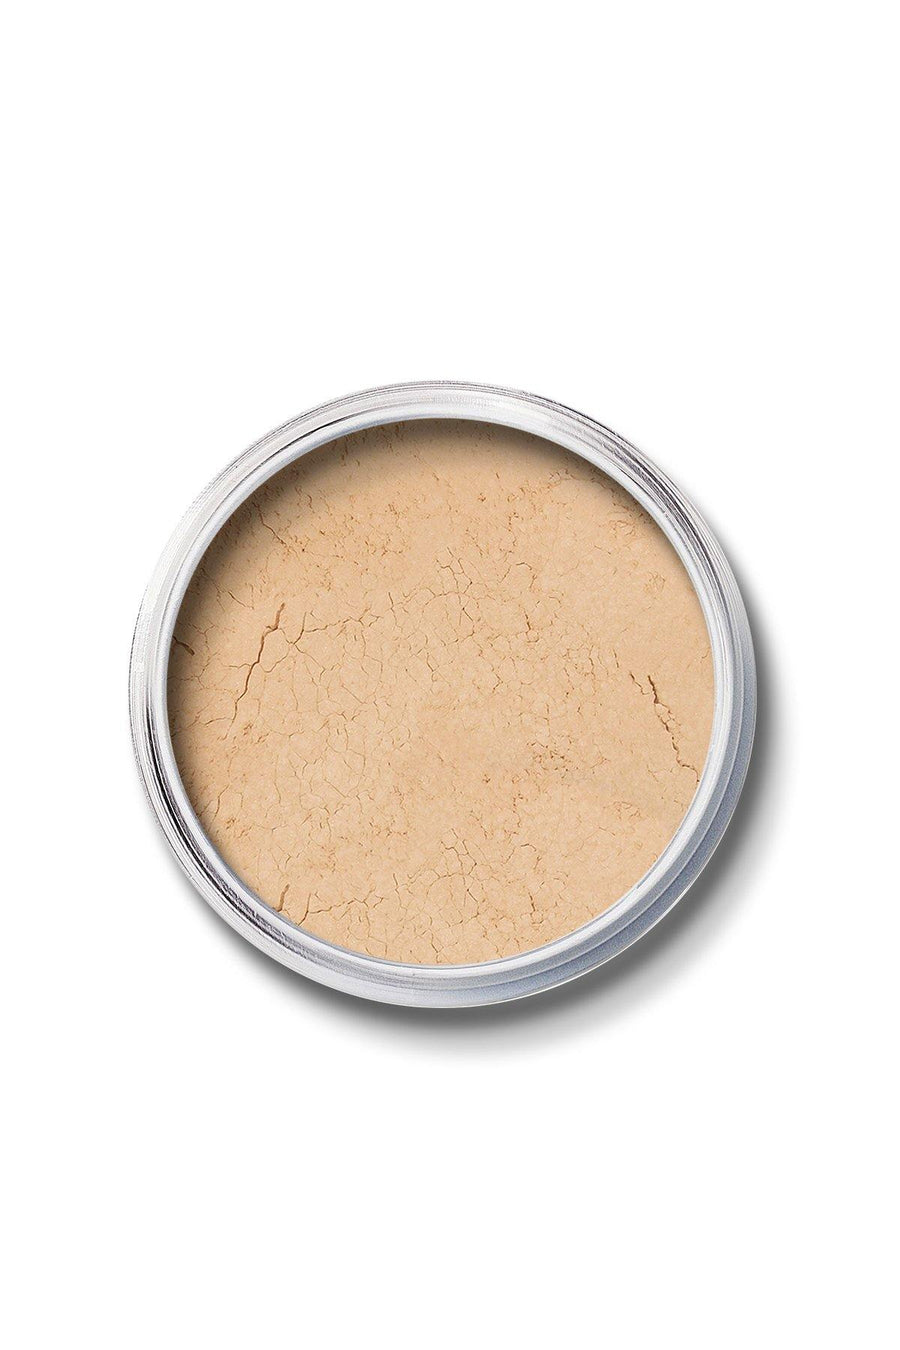 Mineral SPF 15 Foundation #3 - Suede - Blend Mineral Cosmetics